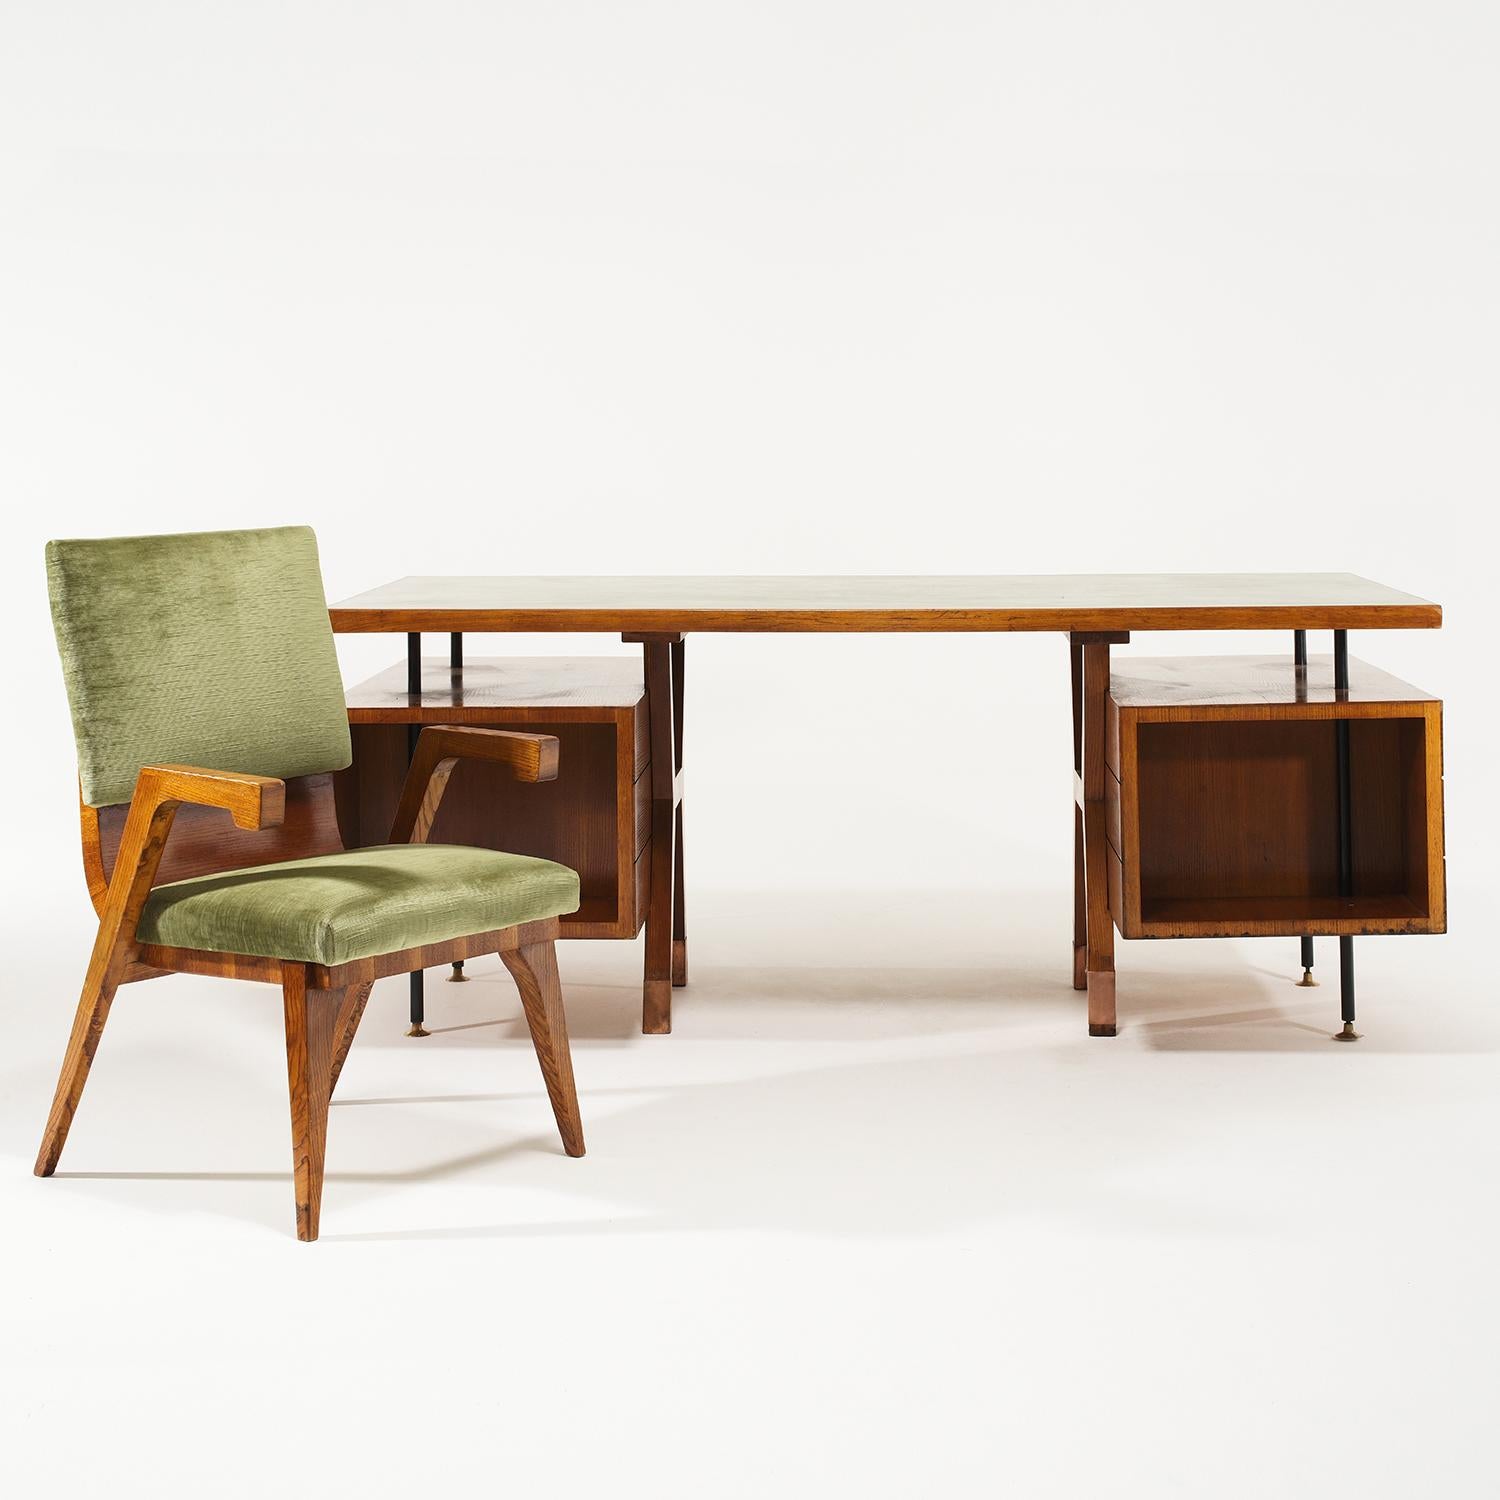 A vintage Mid-Century modern Italian office set of a writing desk and an armchair made of hand crafted polished Walnut, designed by Amleto Sartori in good condition. The floating rectangular top is made of hand painted colored laminate. The desk is